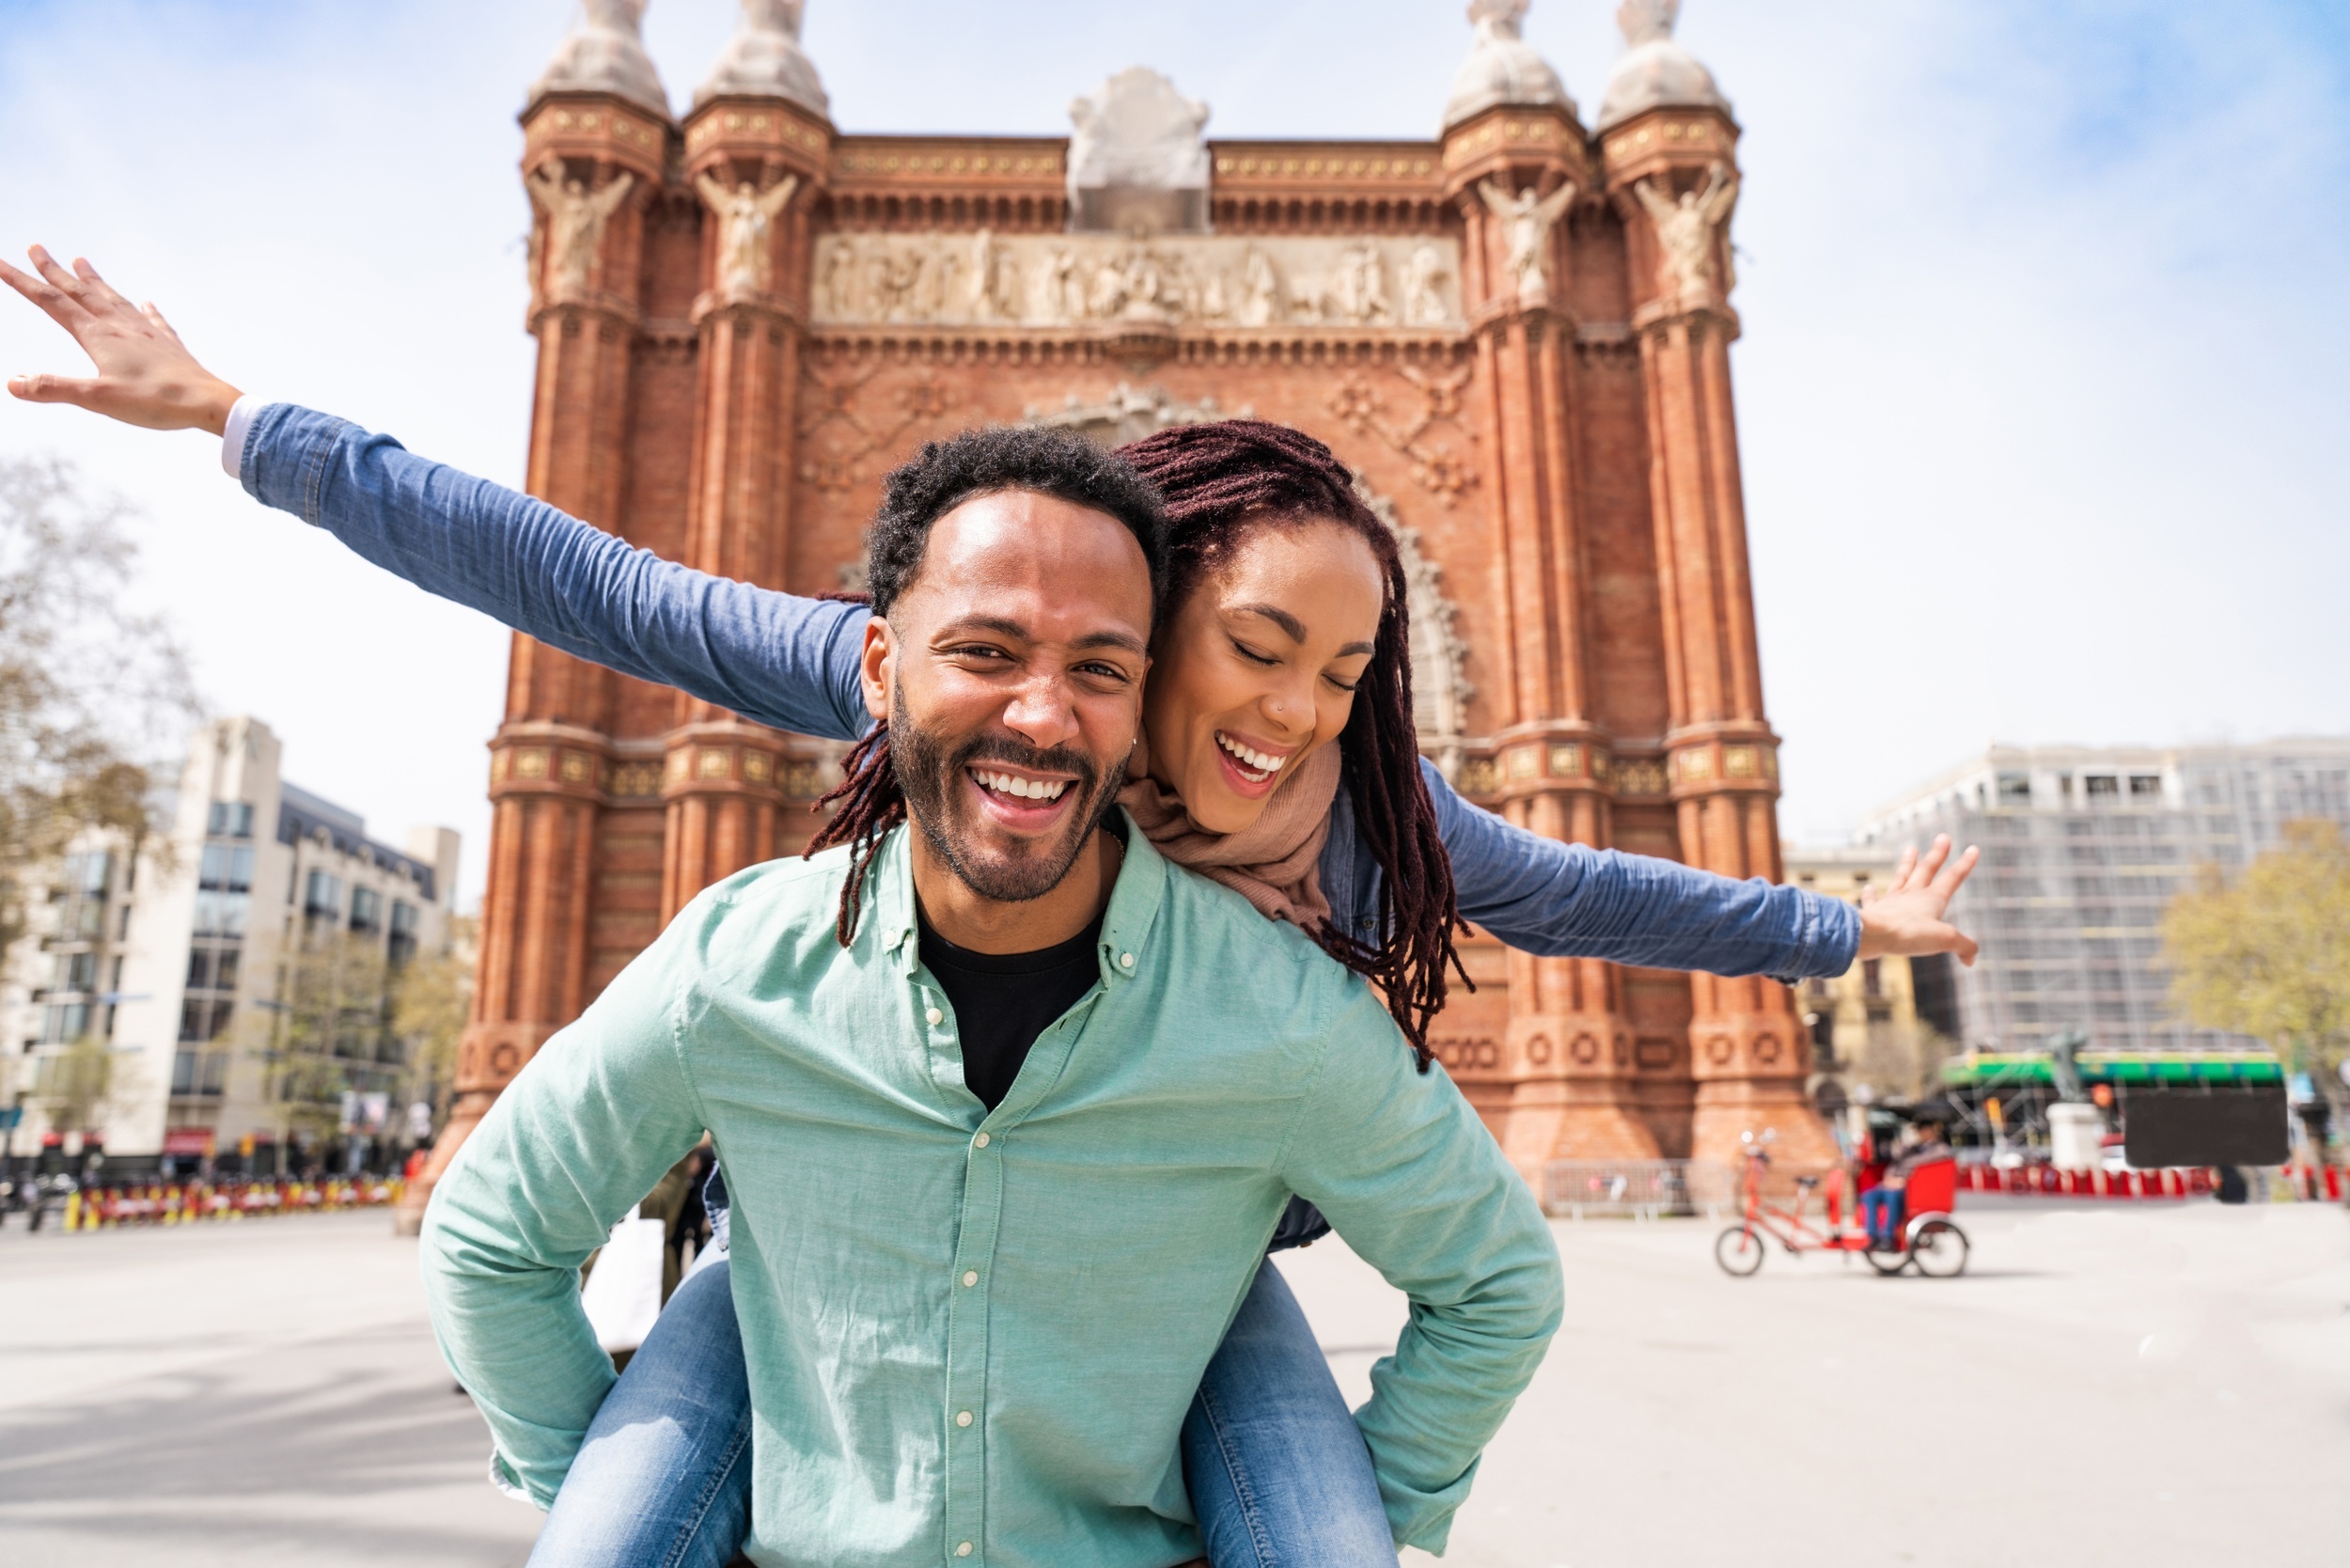 <p>Barcelona is an amazing place to visit with your partner. The Gothic buildings and sweeping promenades are best explored together. And, of course, a little time at the beach before heading to a tapas bar is always a good time.</p><p>You may also like: <a href='https://www.yardbarker.com/lifestyle/articles/pie_in_the_sky_our_20_favorite_pizza_toppings_012424/s1__37493727'>Pie in the sky: Our 20 favorite pizza toppings</a></p>